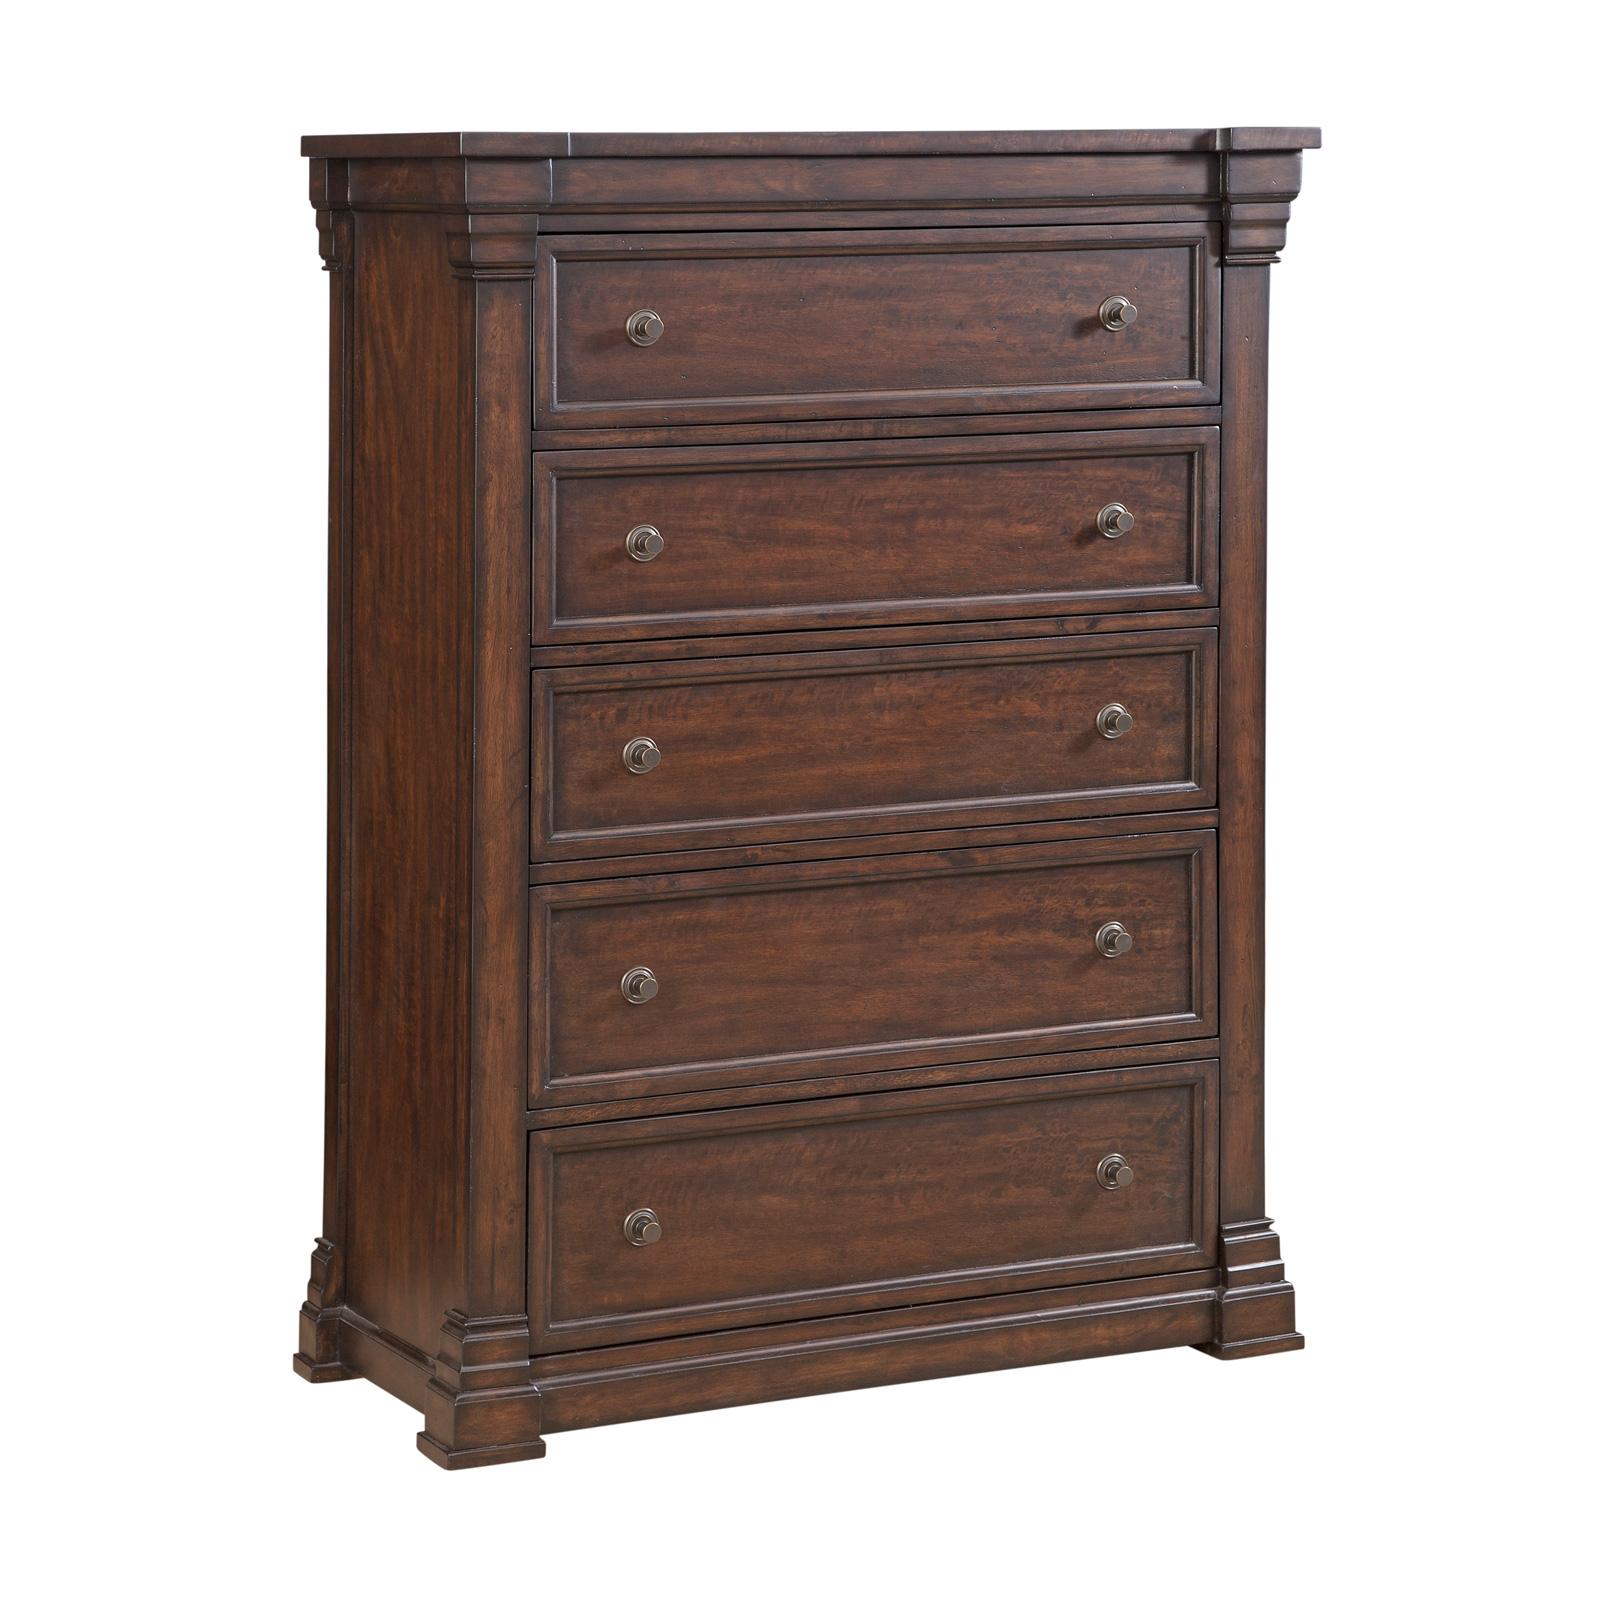 American Woodcrafters Kestrel Hills 4800-150 Chest